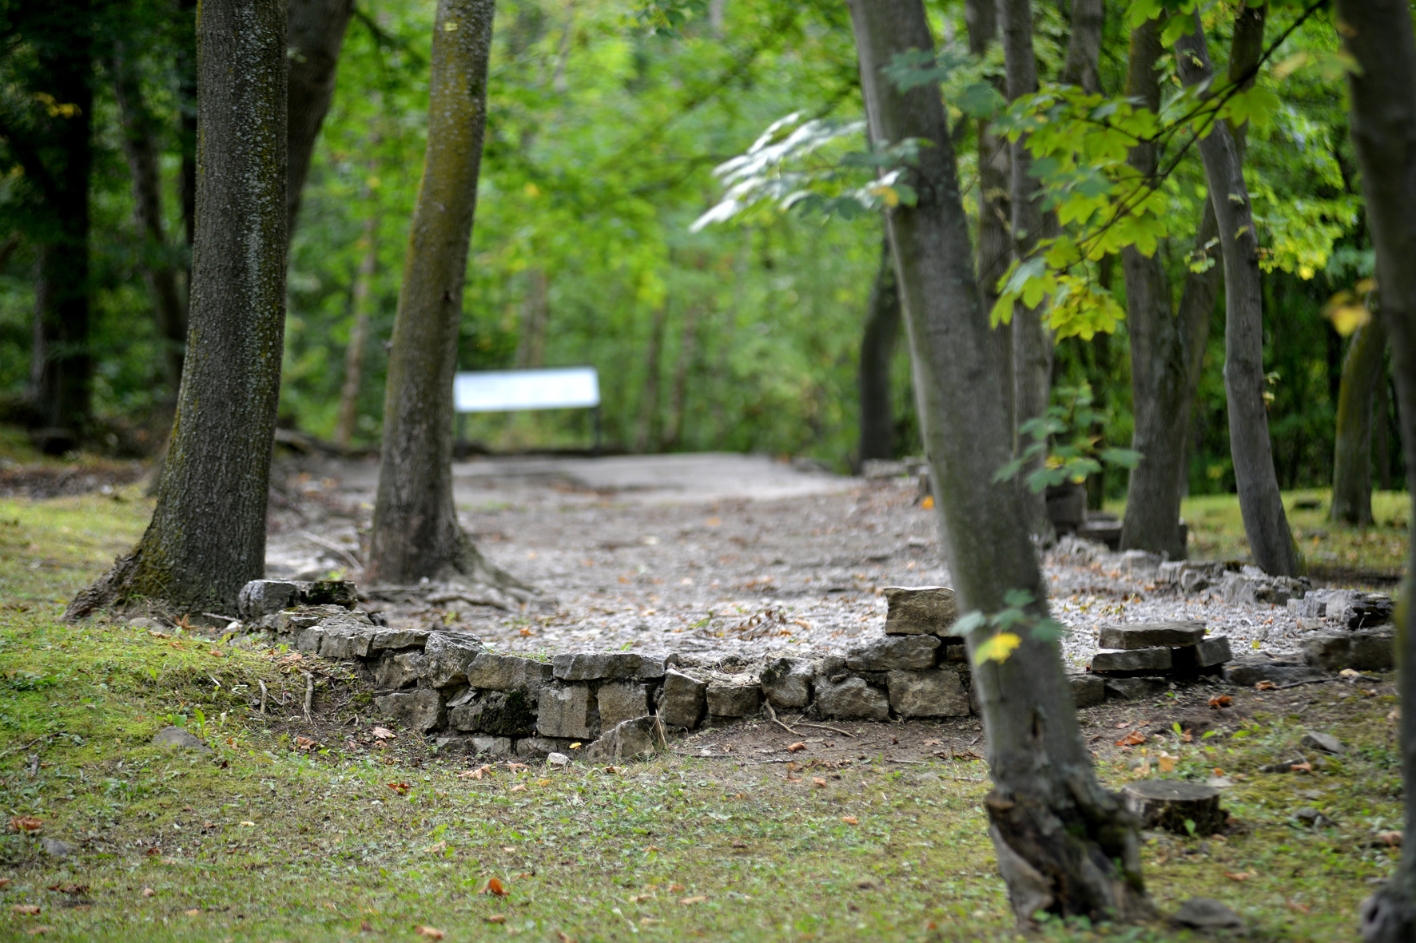 In the center of the image, a small, irregular wall remnant enclosing a gray gravel area stands in the forest. 